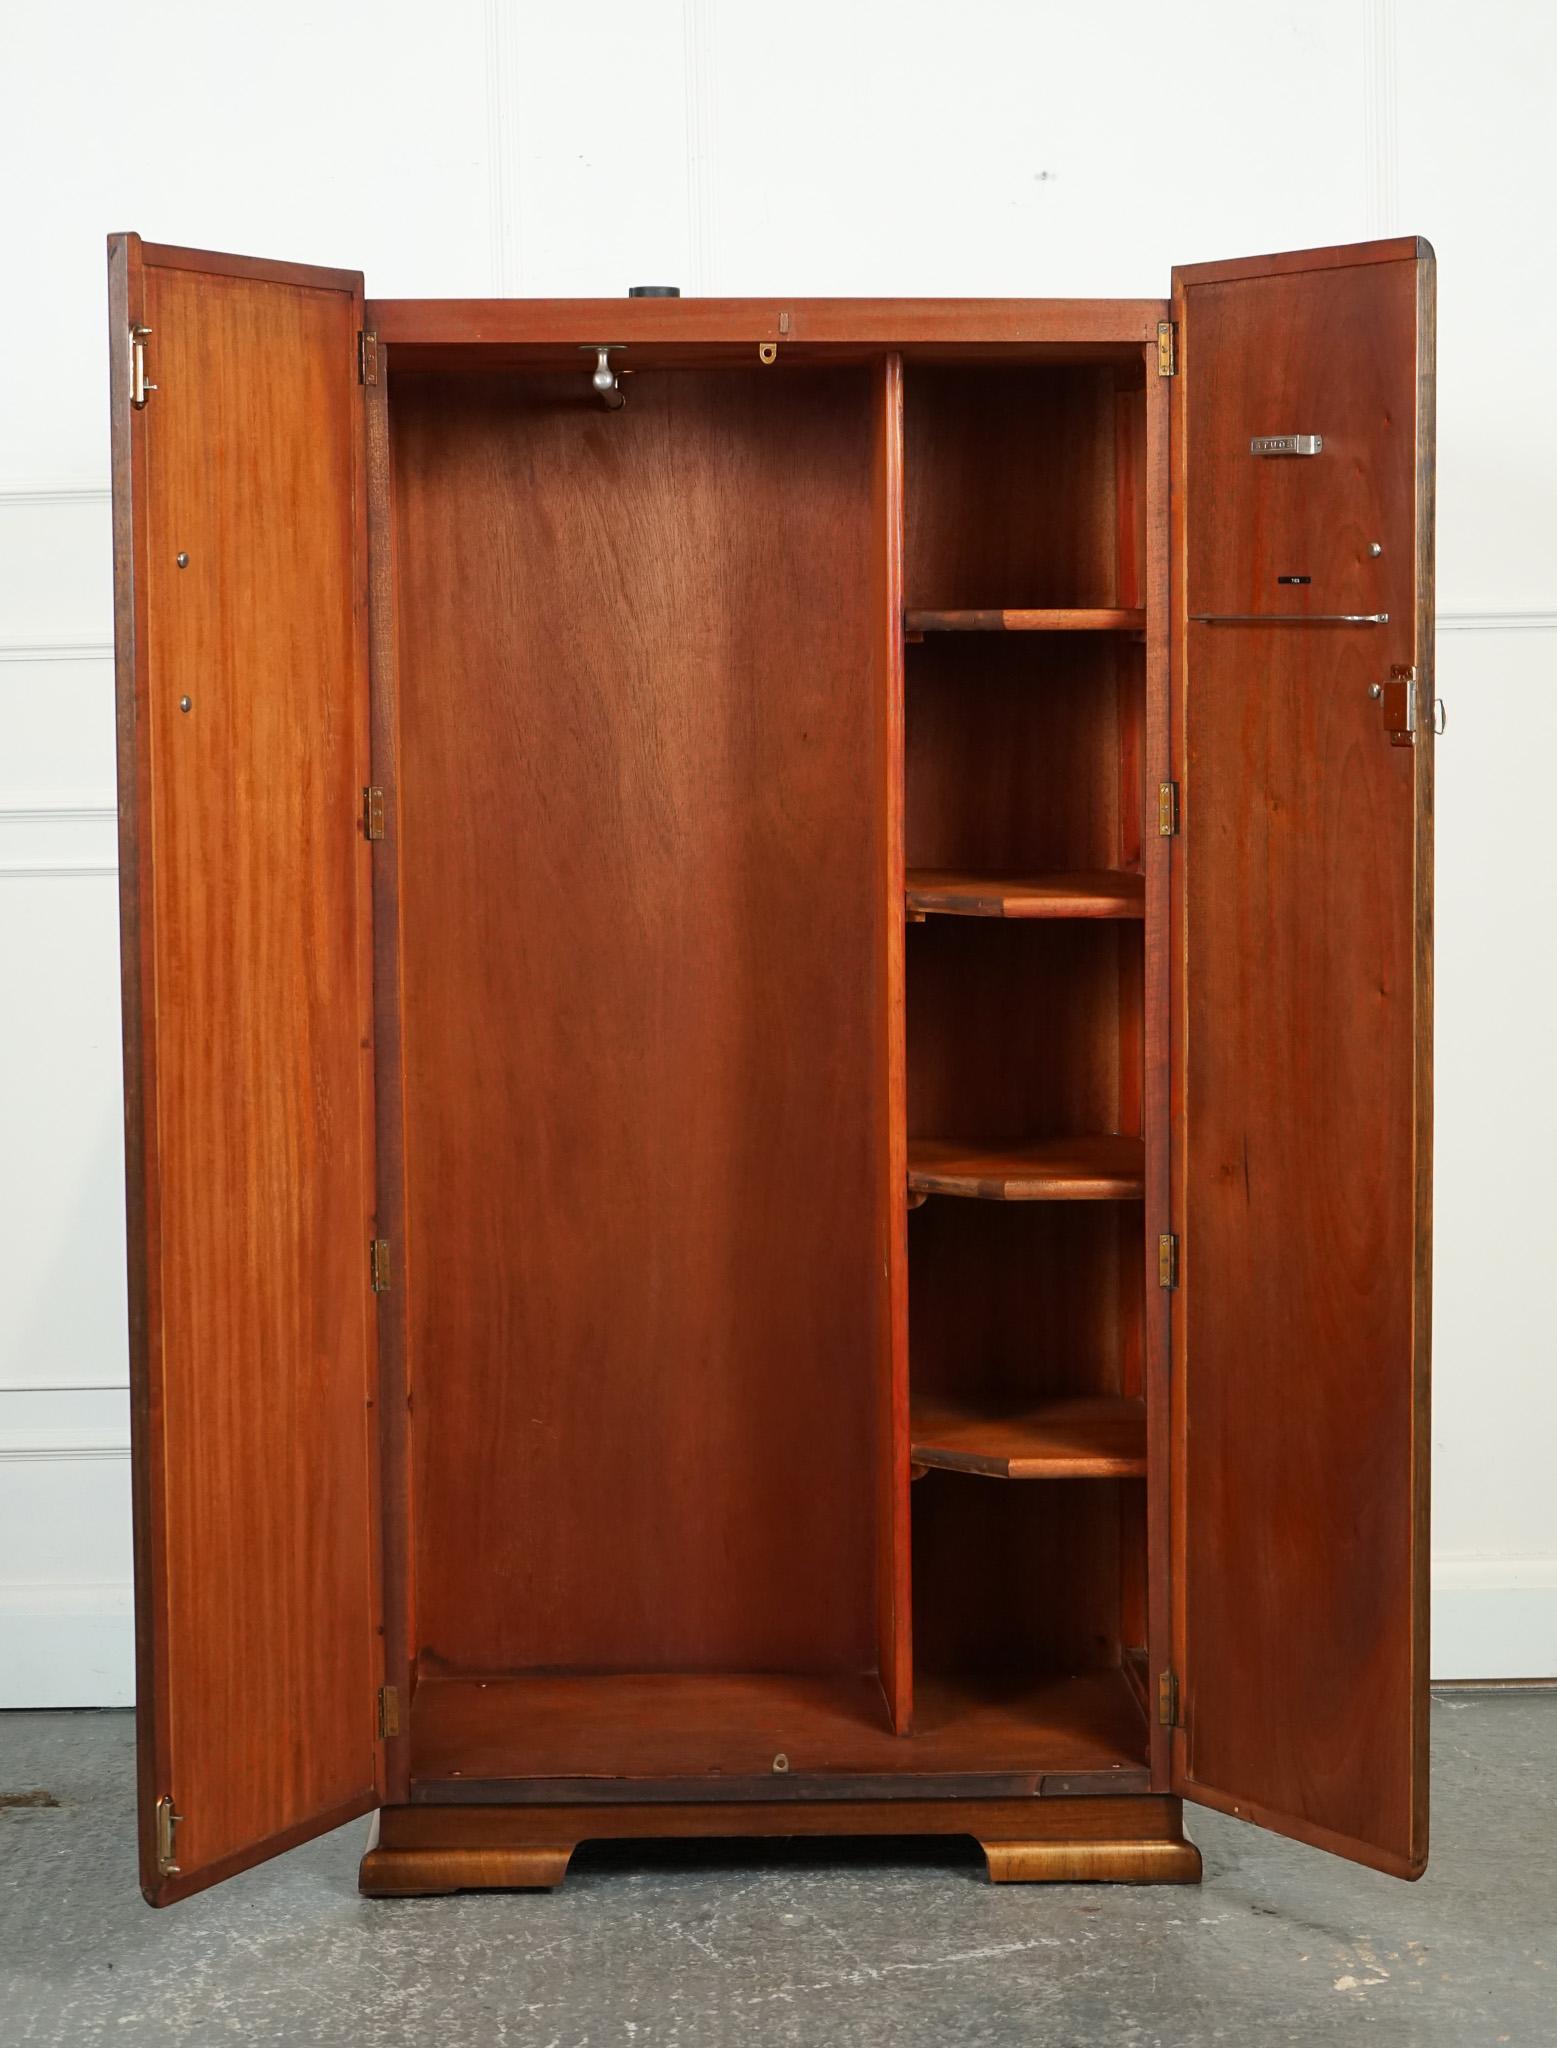 LOVELY SMALL COMPACT ART DECO BURR WALNuT WARDROBE For Sale 2